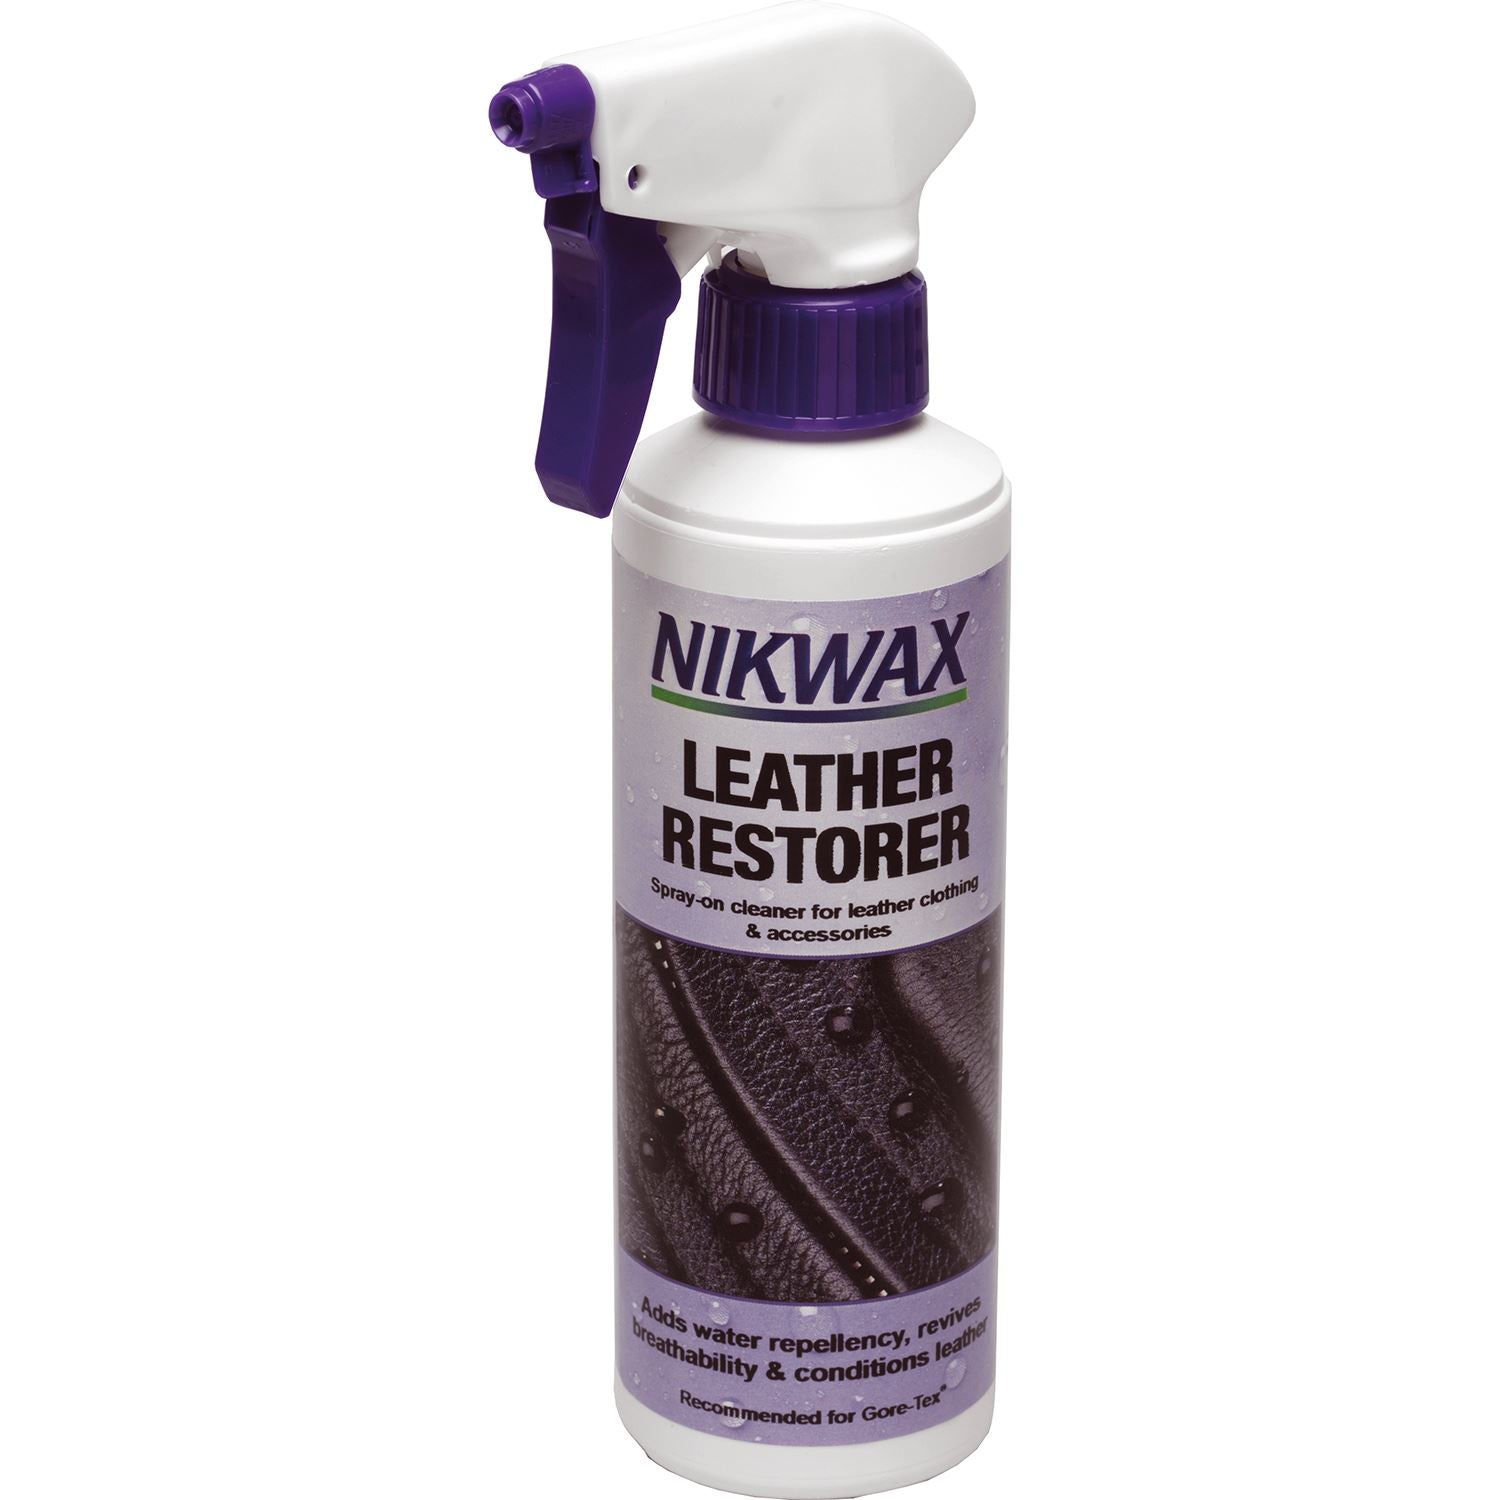 Nikwax Leather Restorer - Just Horse Riders